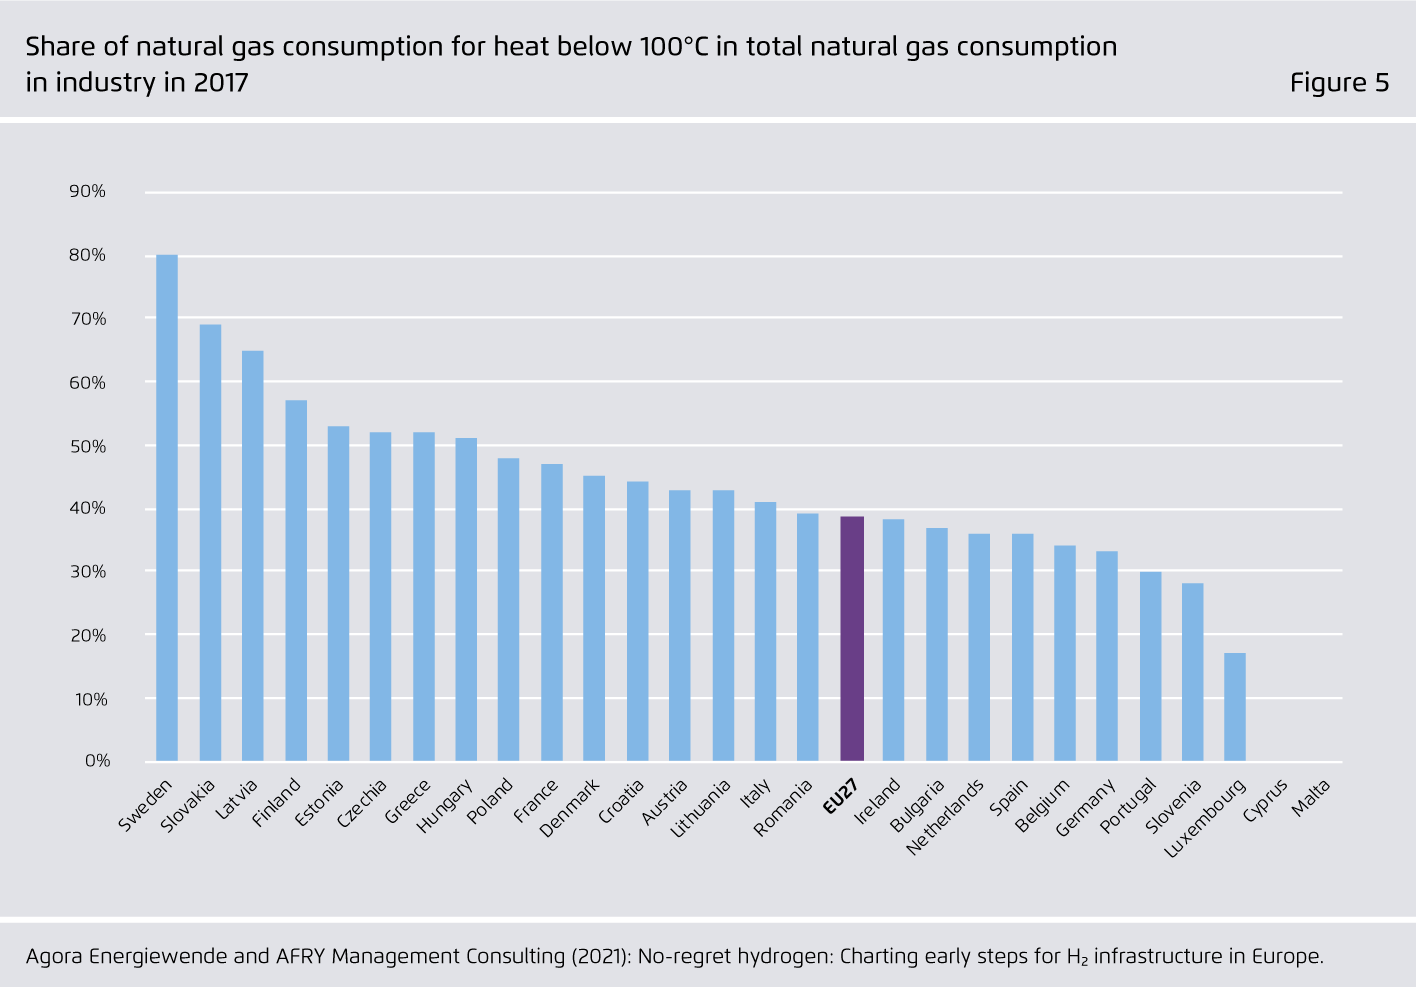 Preview for Share of natural gas consumption for heat below 100°C in total natural gas consumption in industry in 2017